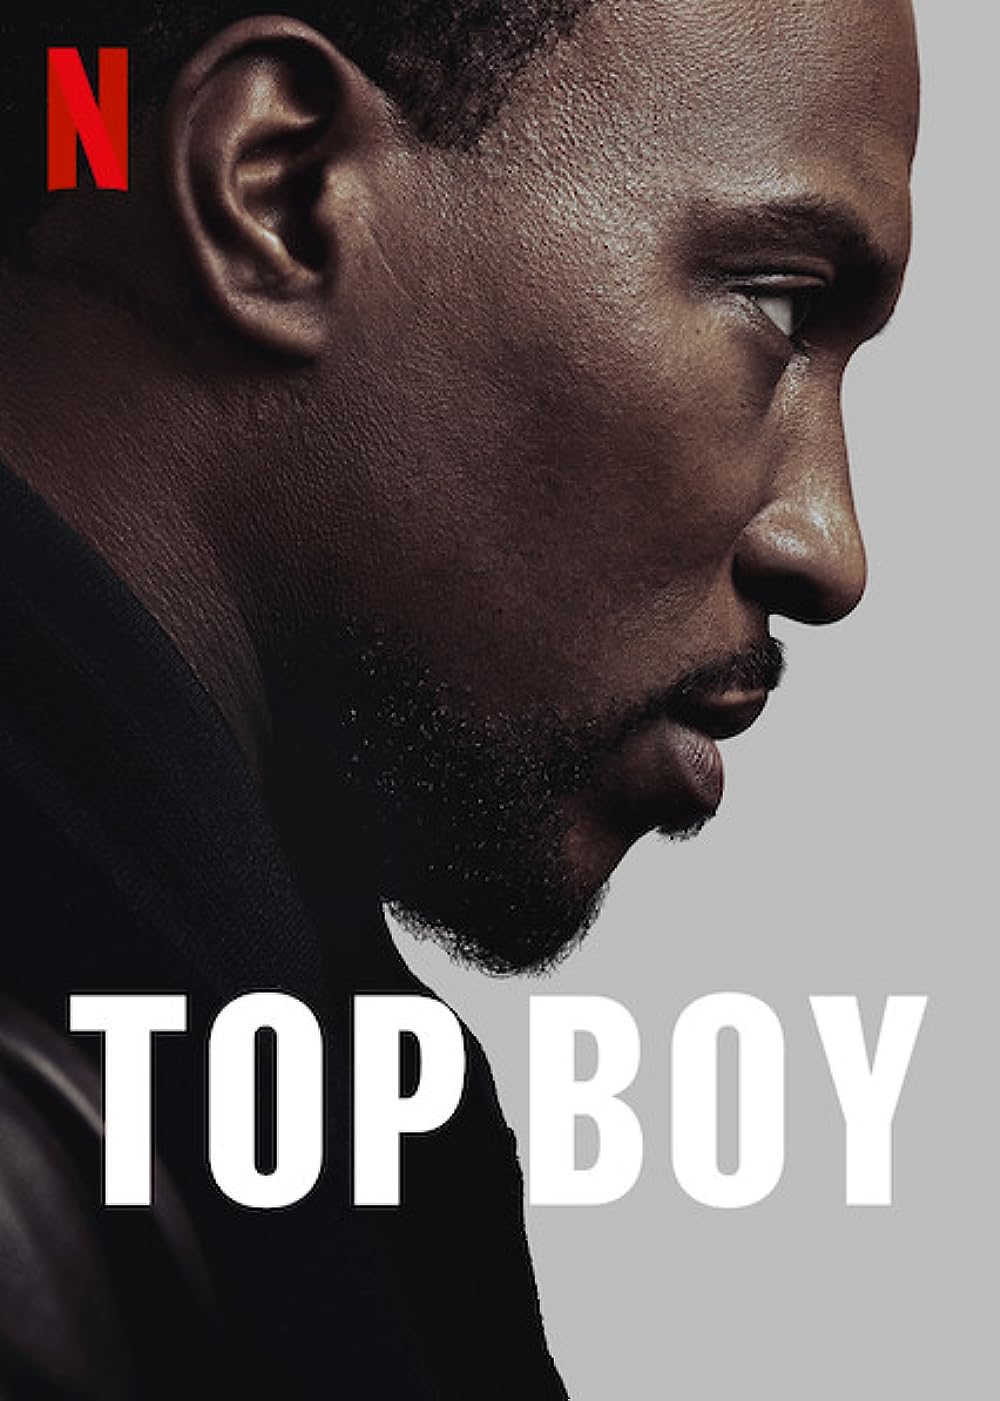 Top Boy Season 3 (September 7 - Netflix)Top Boy returns to the gritty estates of east London, delving into the conflicts between drug cartels and those striving for an honest life. 